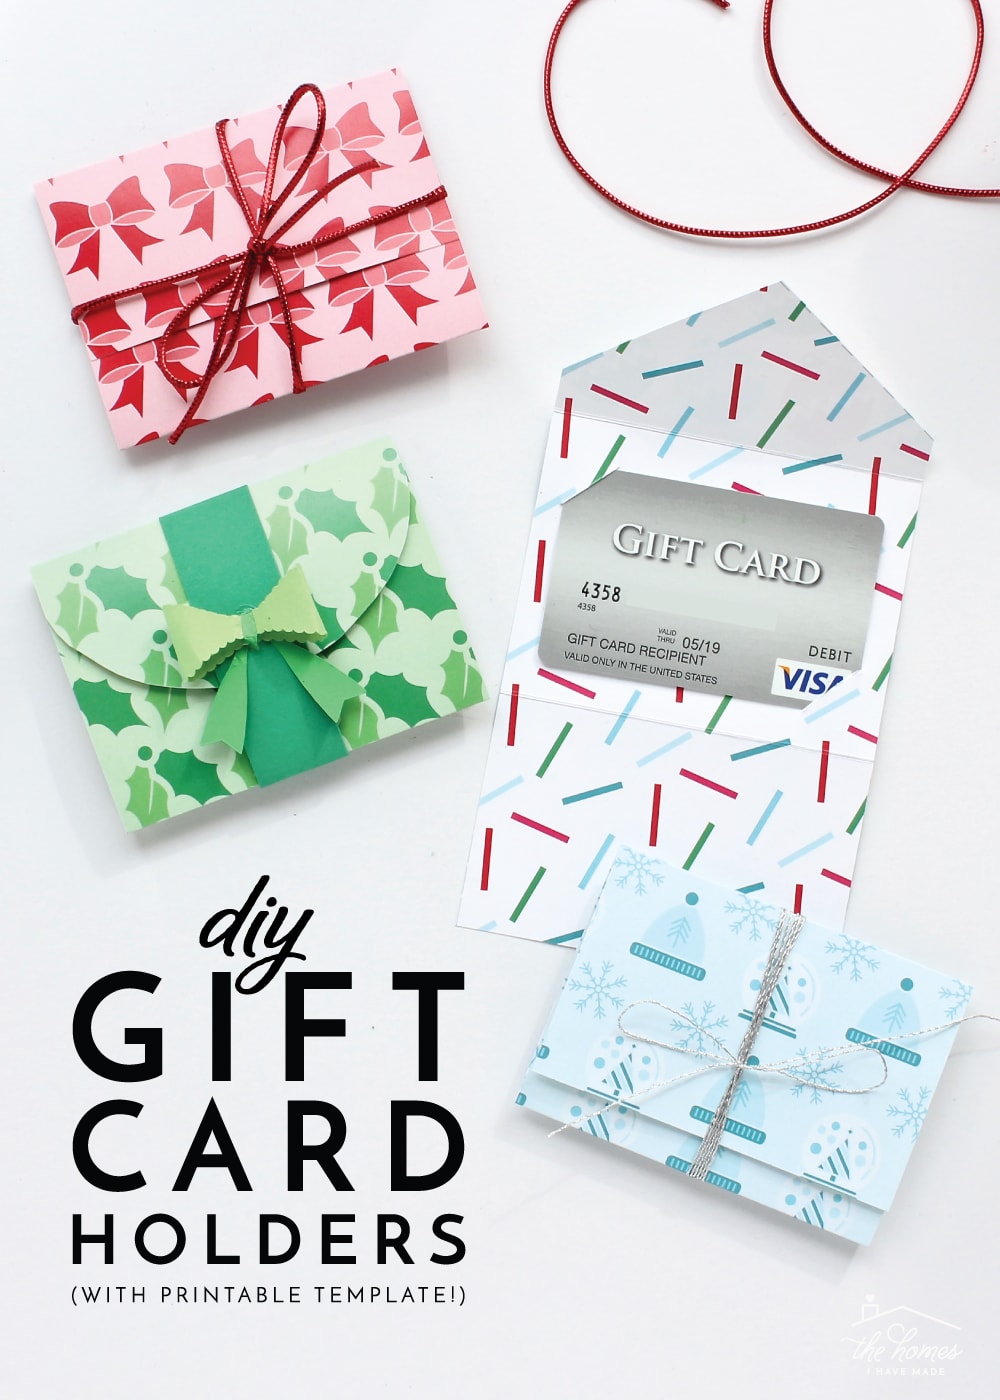 DIY Gift Card Holders (with Printable Template!) - The Homes I Have Made